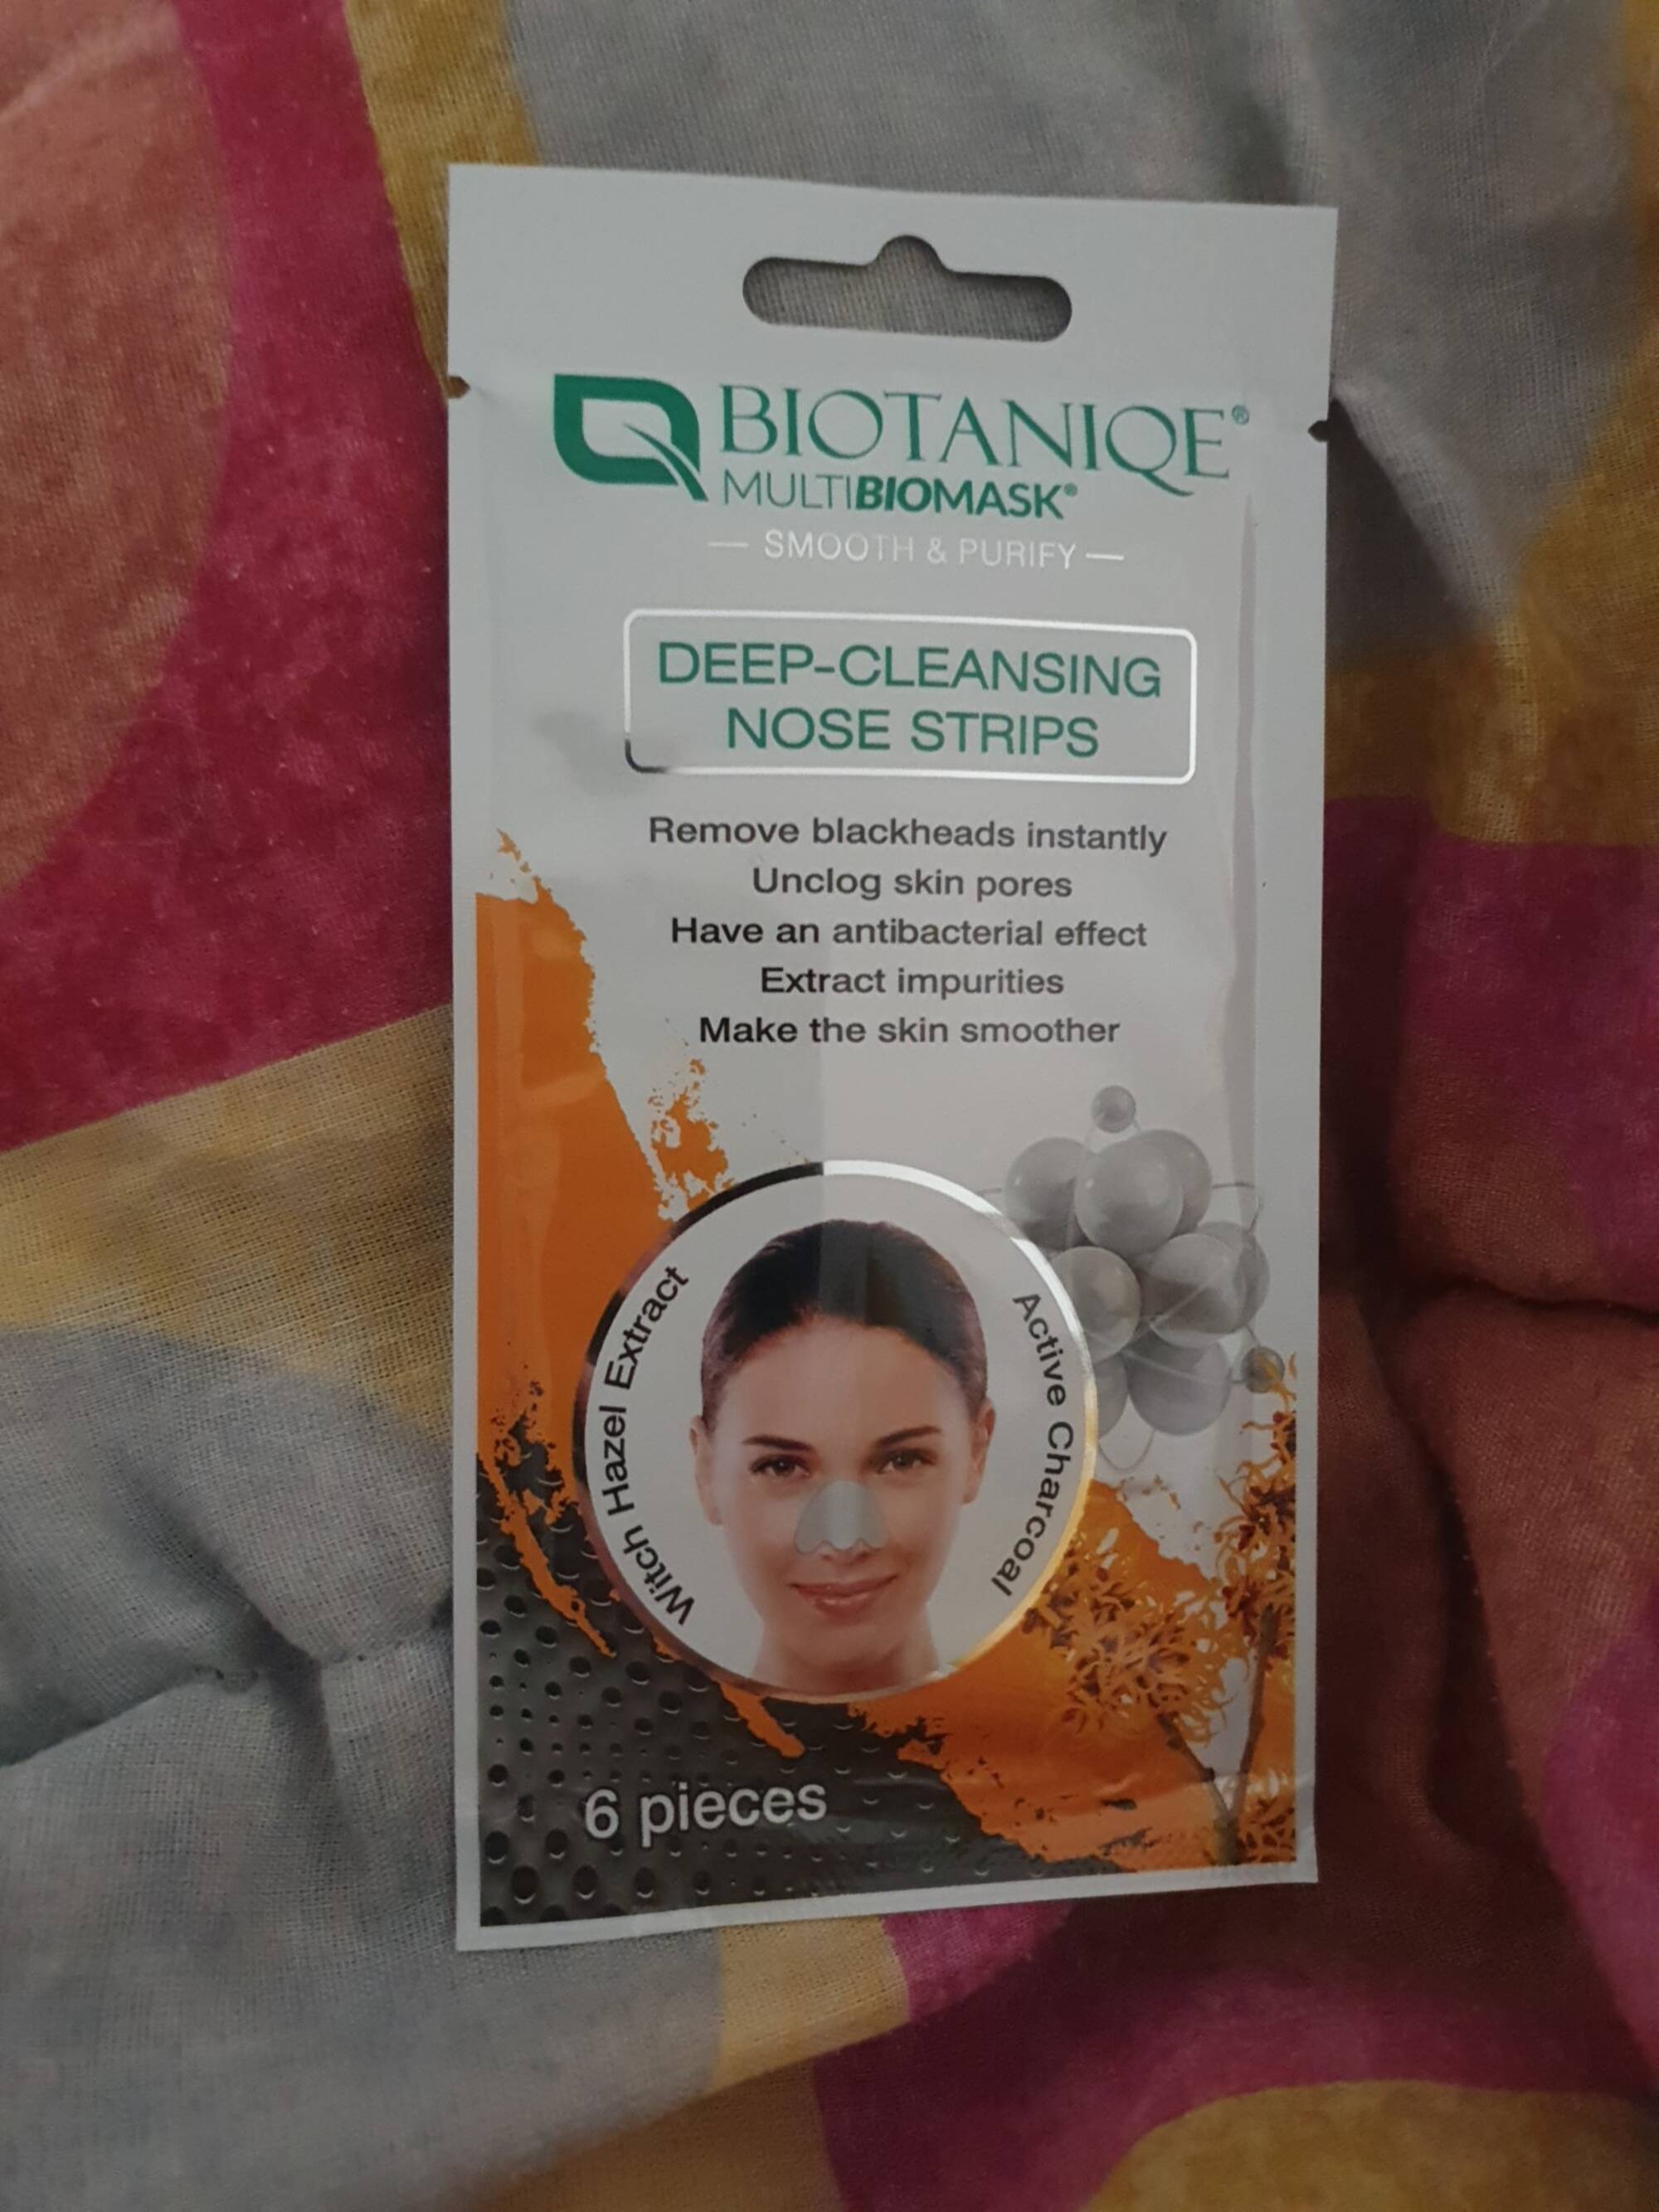 BIOTANIQE - Multibiomask smooth and purify Deep-cleansing nose strips